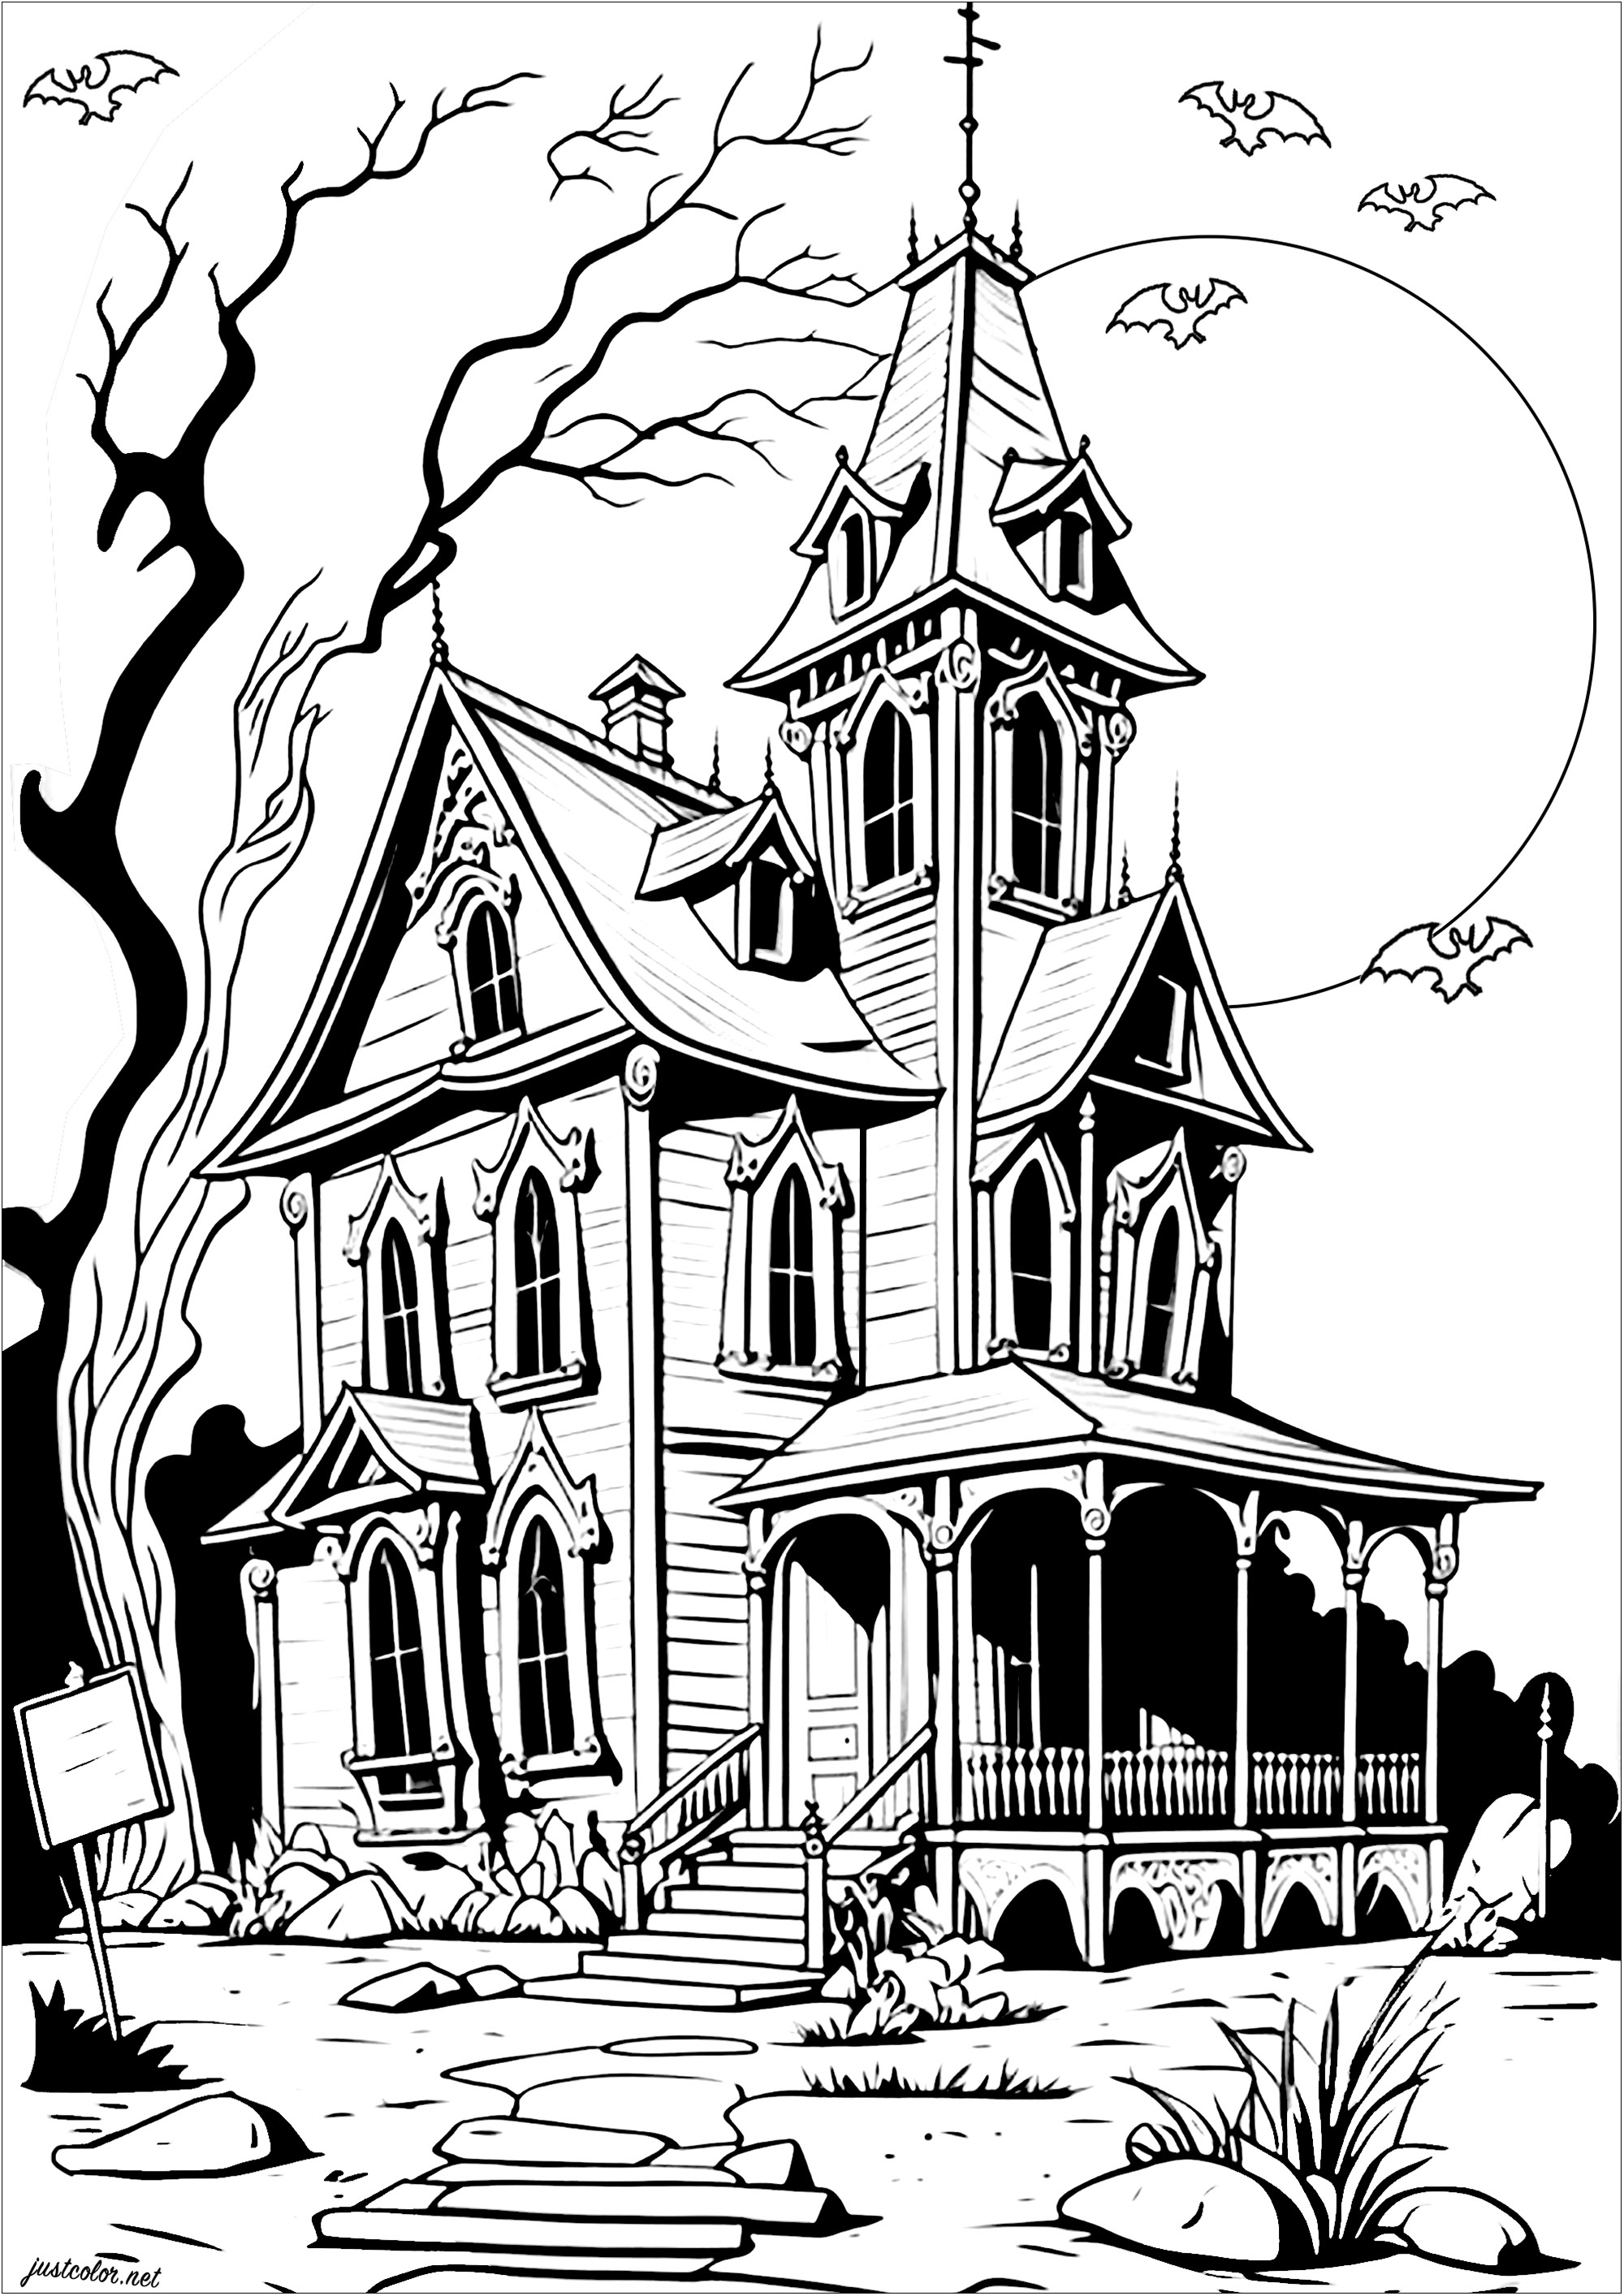 Coloring of a very gloomy looking house. Will you dare to enter this house seemingly inhabited by some spirits? The bats are protecting it...